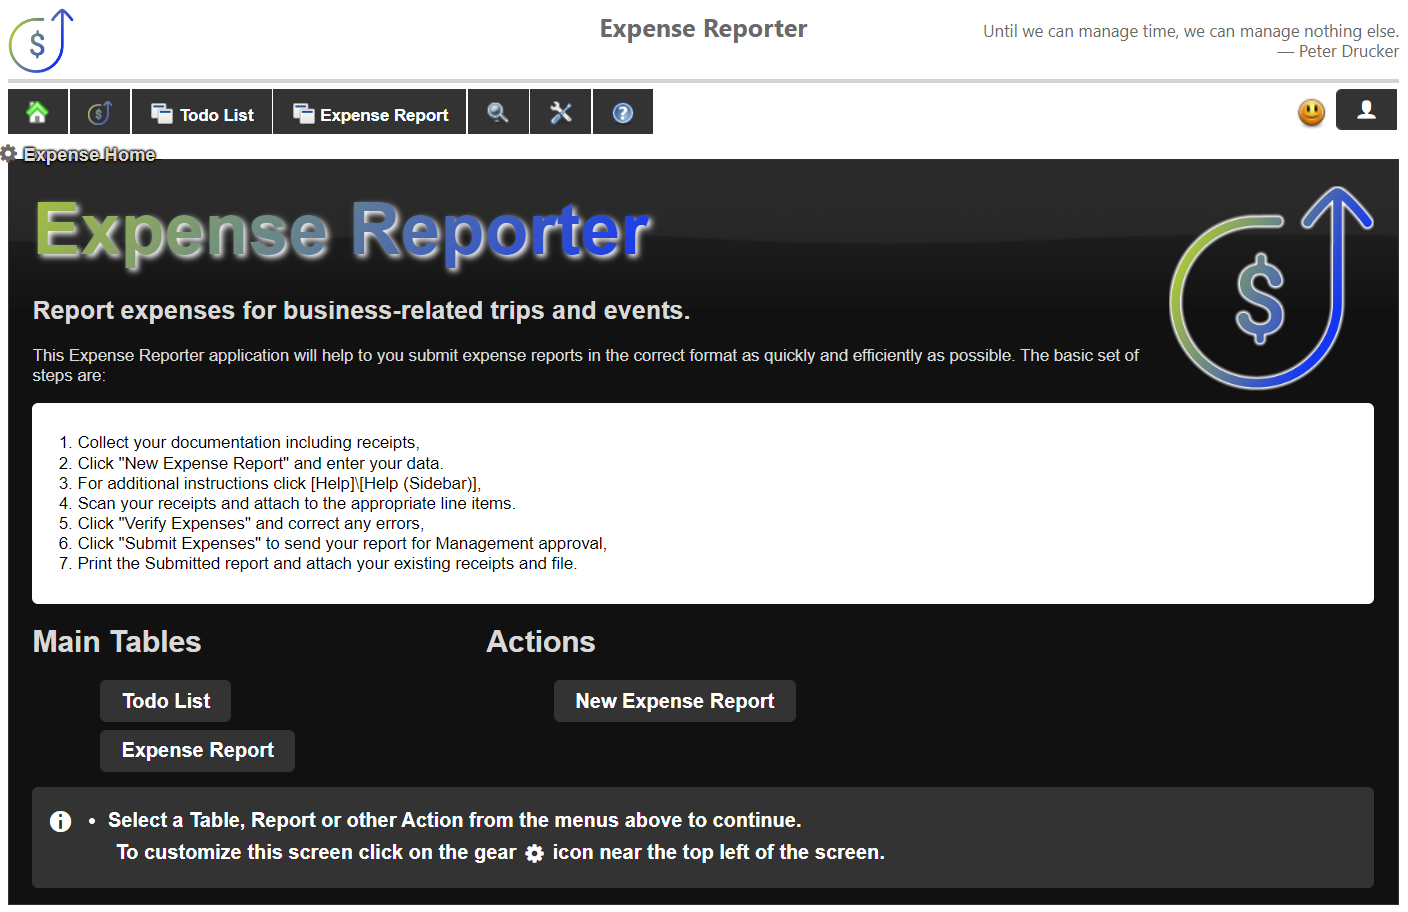 dbFront - Expense Reporter